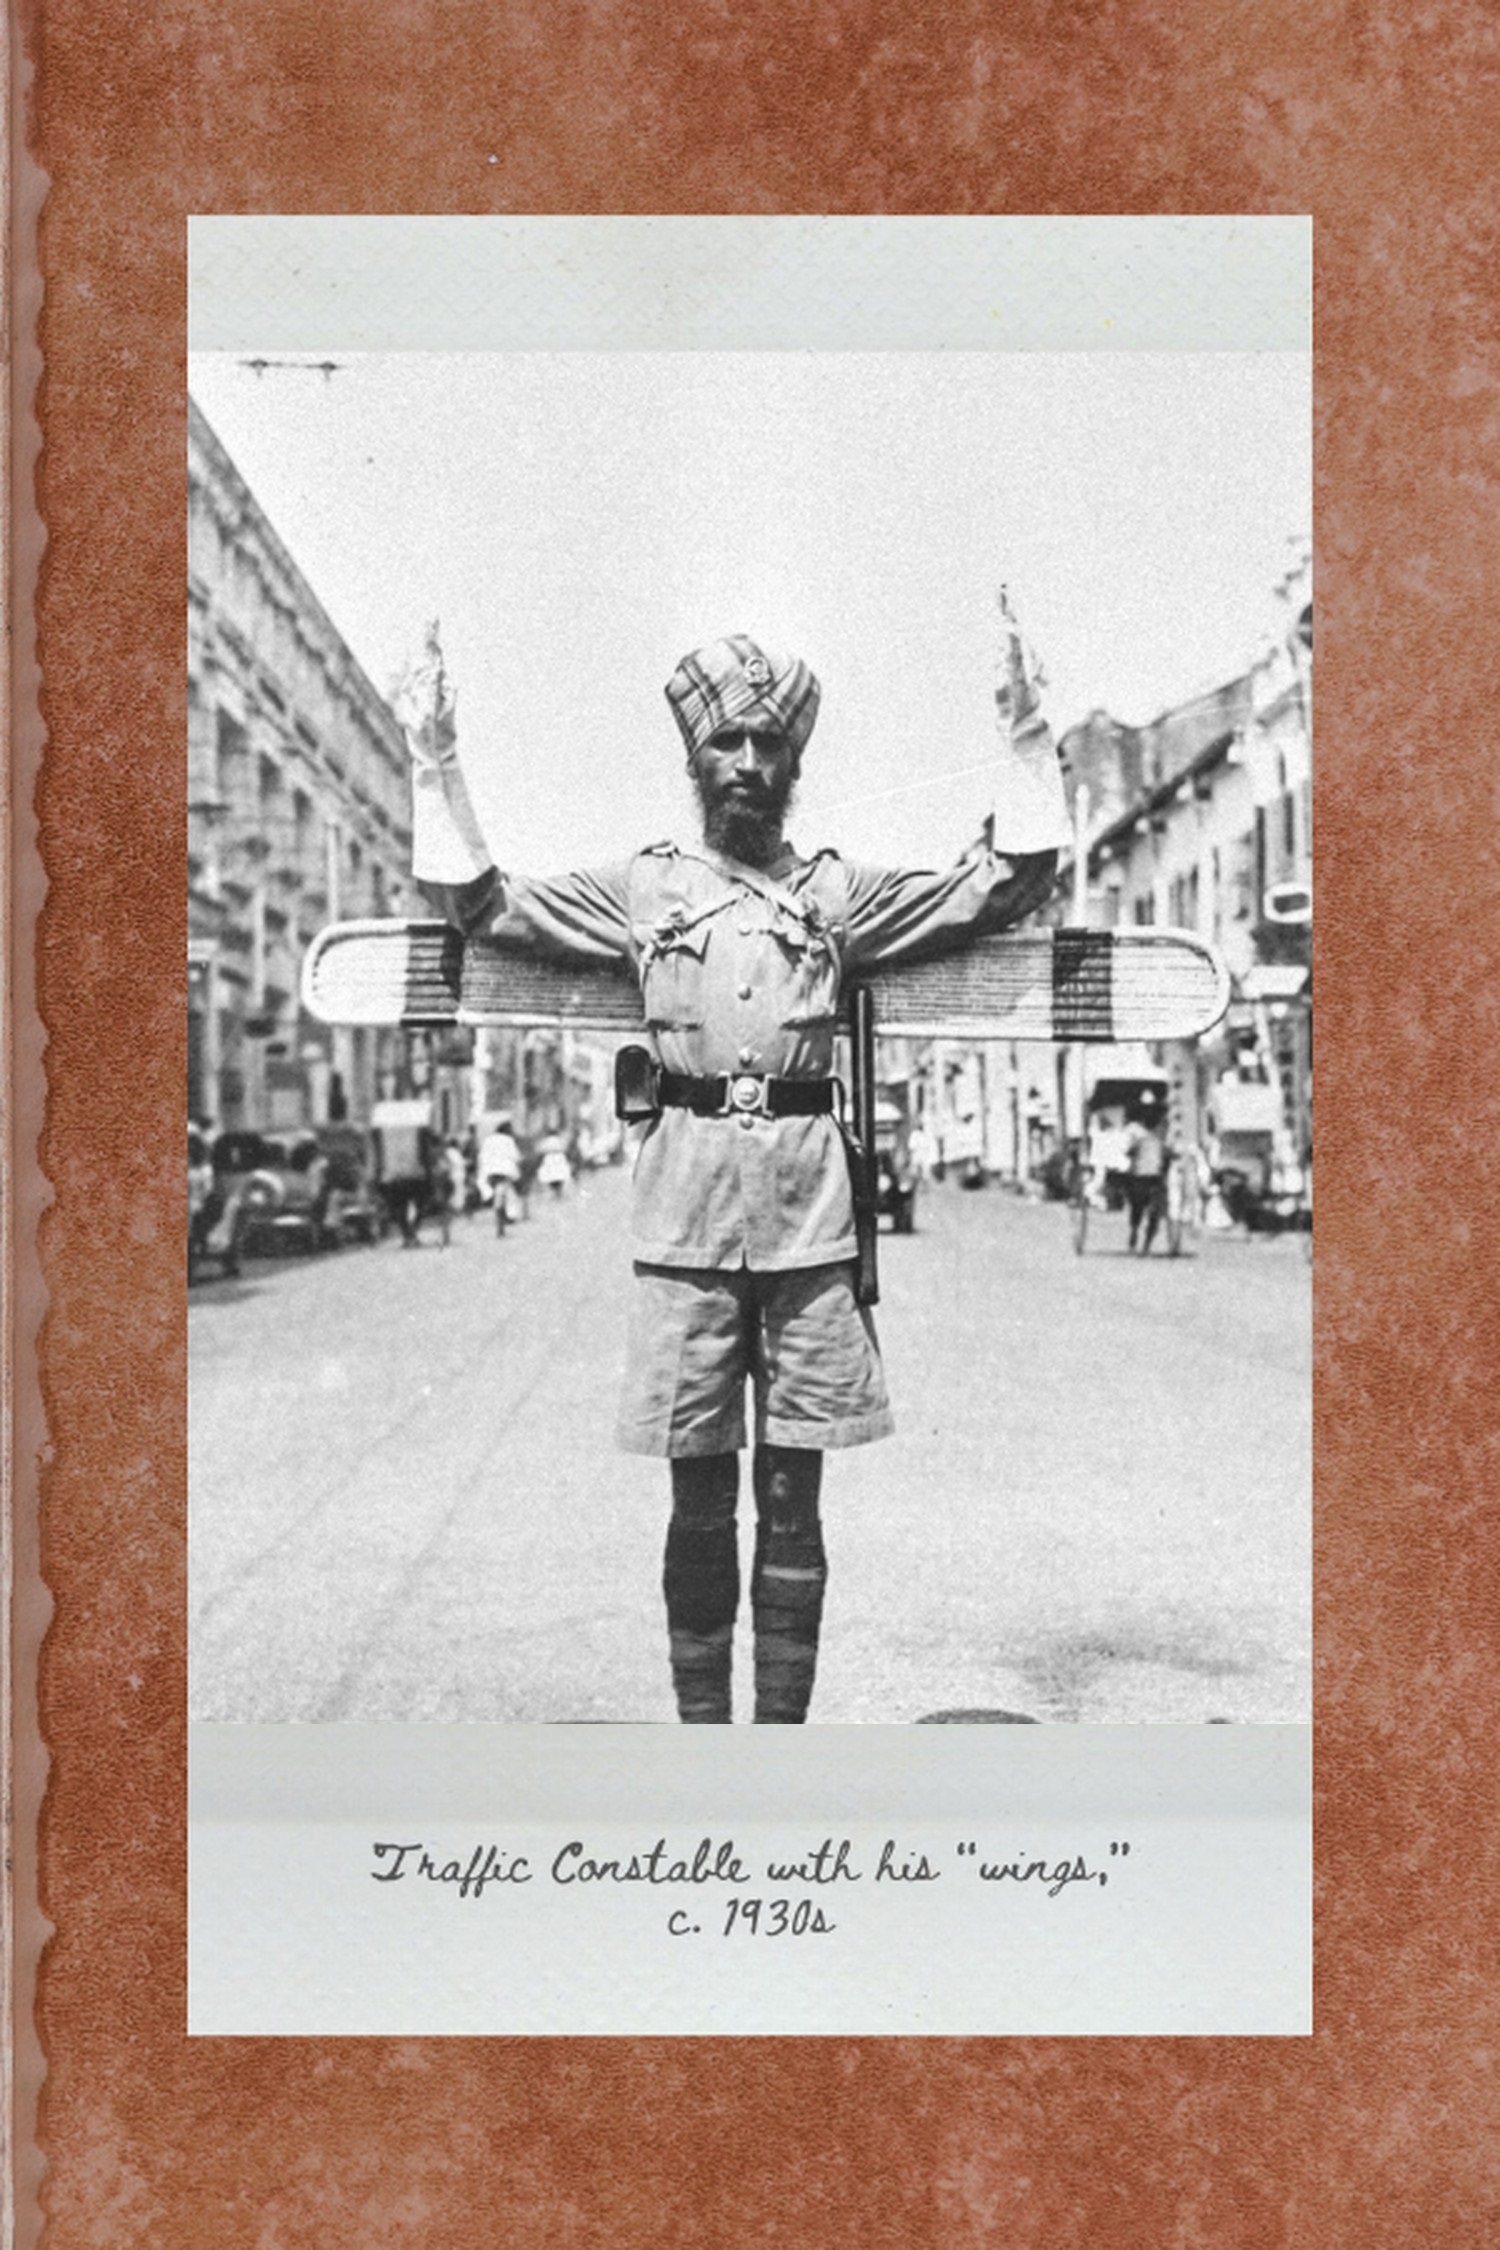 a sikh officer independently standing in the middle of a junction to control traffic, with wooden "wings" at the back of his uniform to indicate direction